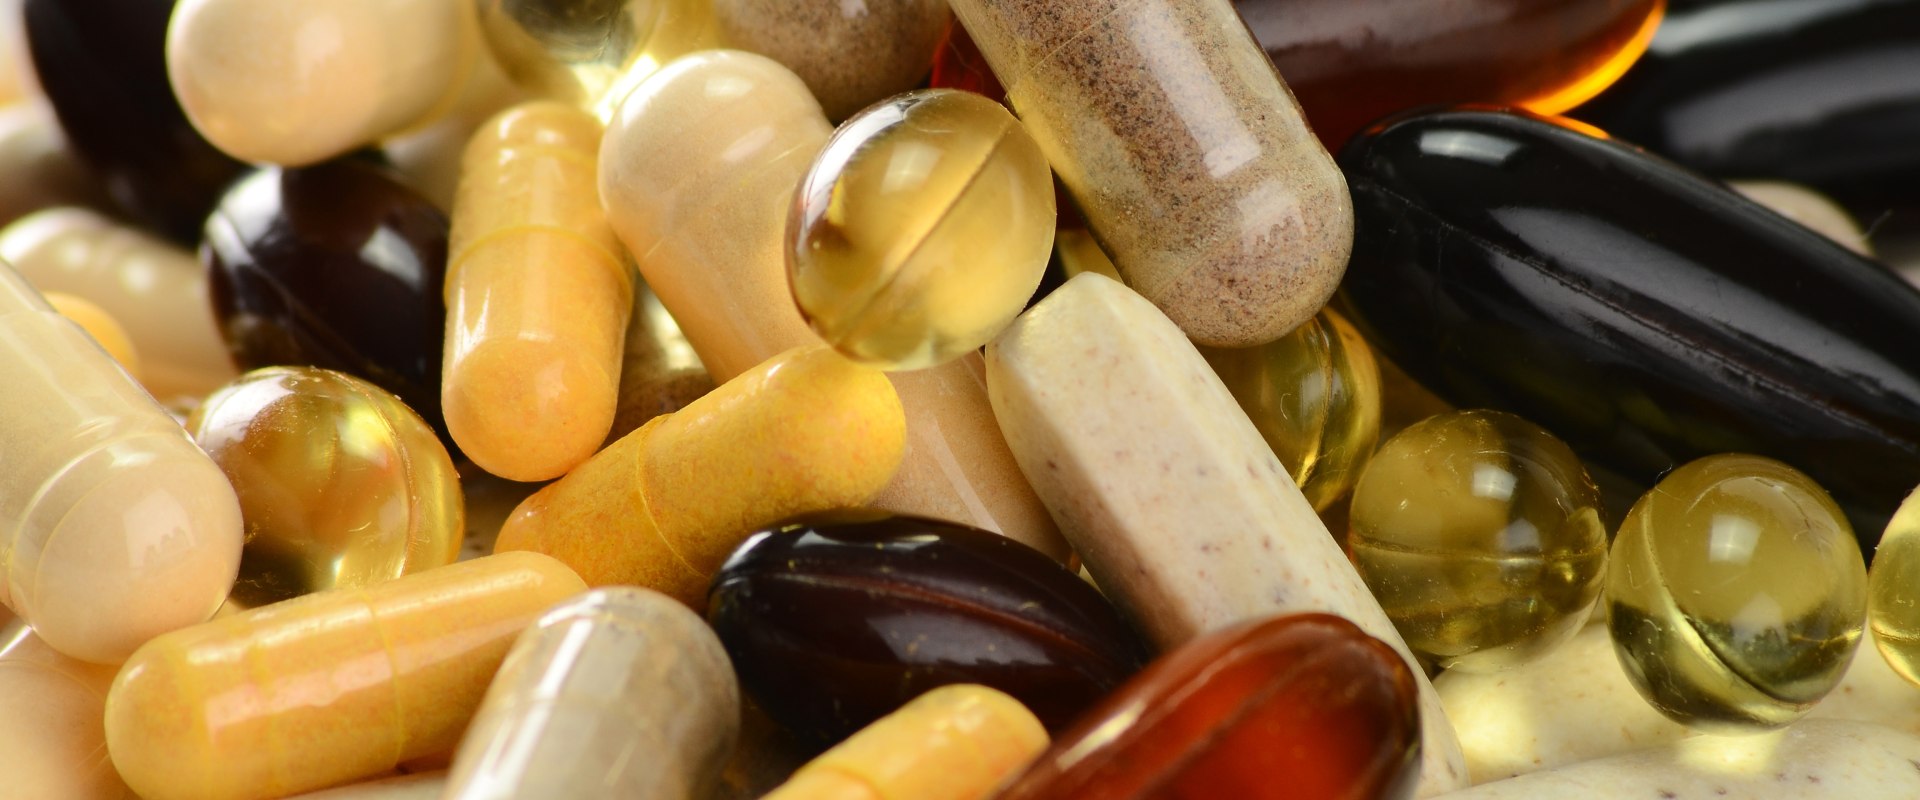 Should You Take Vitamins Without Consulting a Doctor?